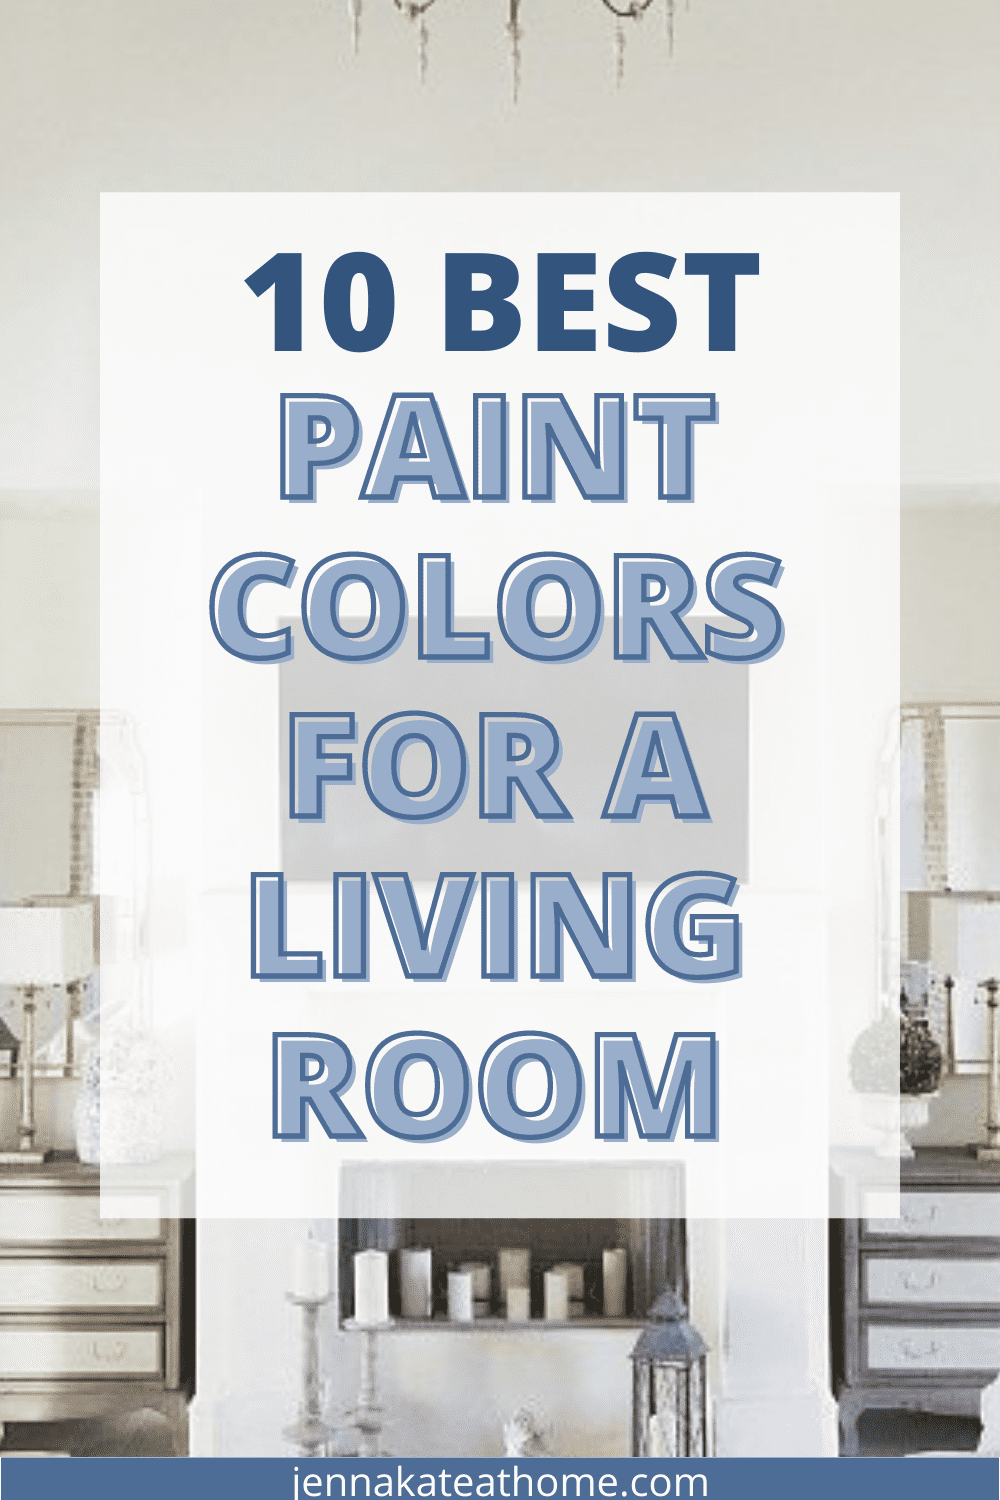 10 Best Paint Colors for a Living Room HD Wallpaper